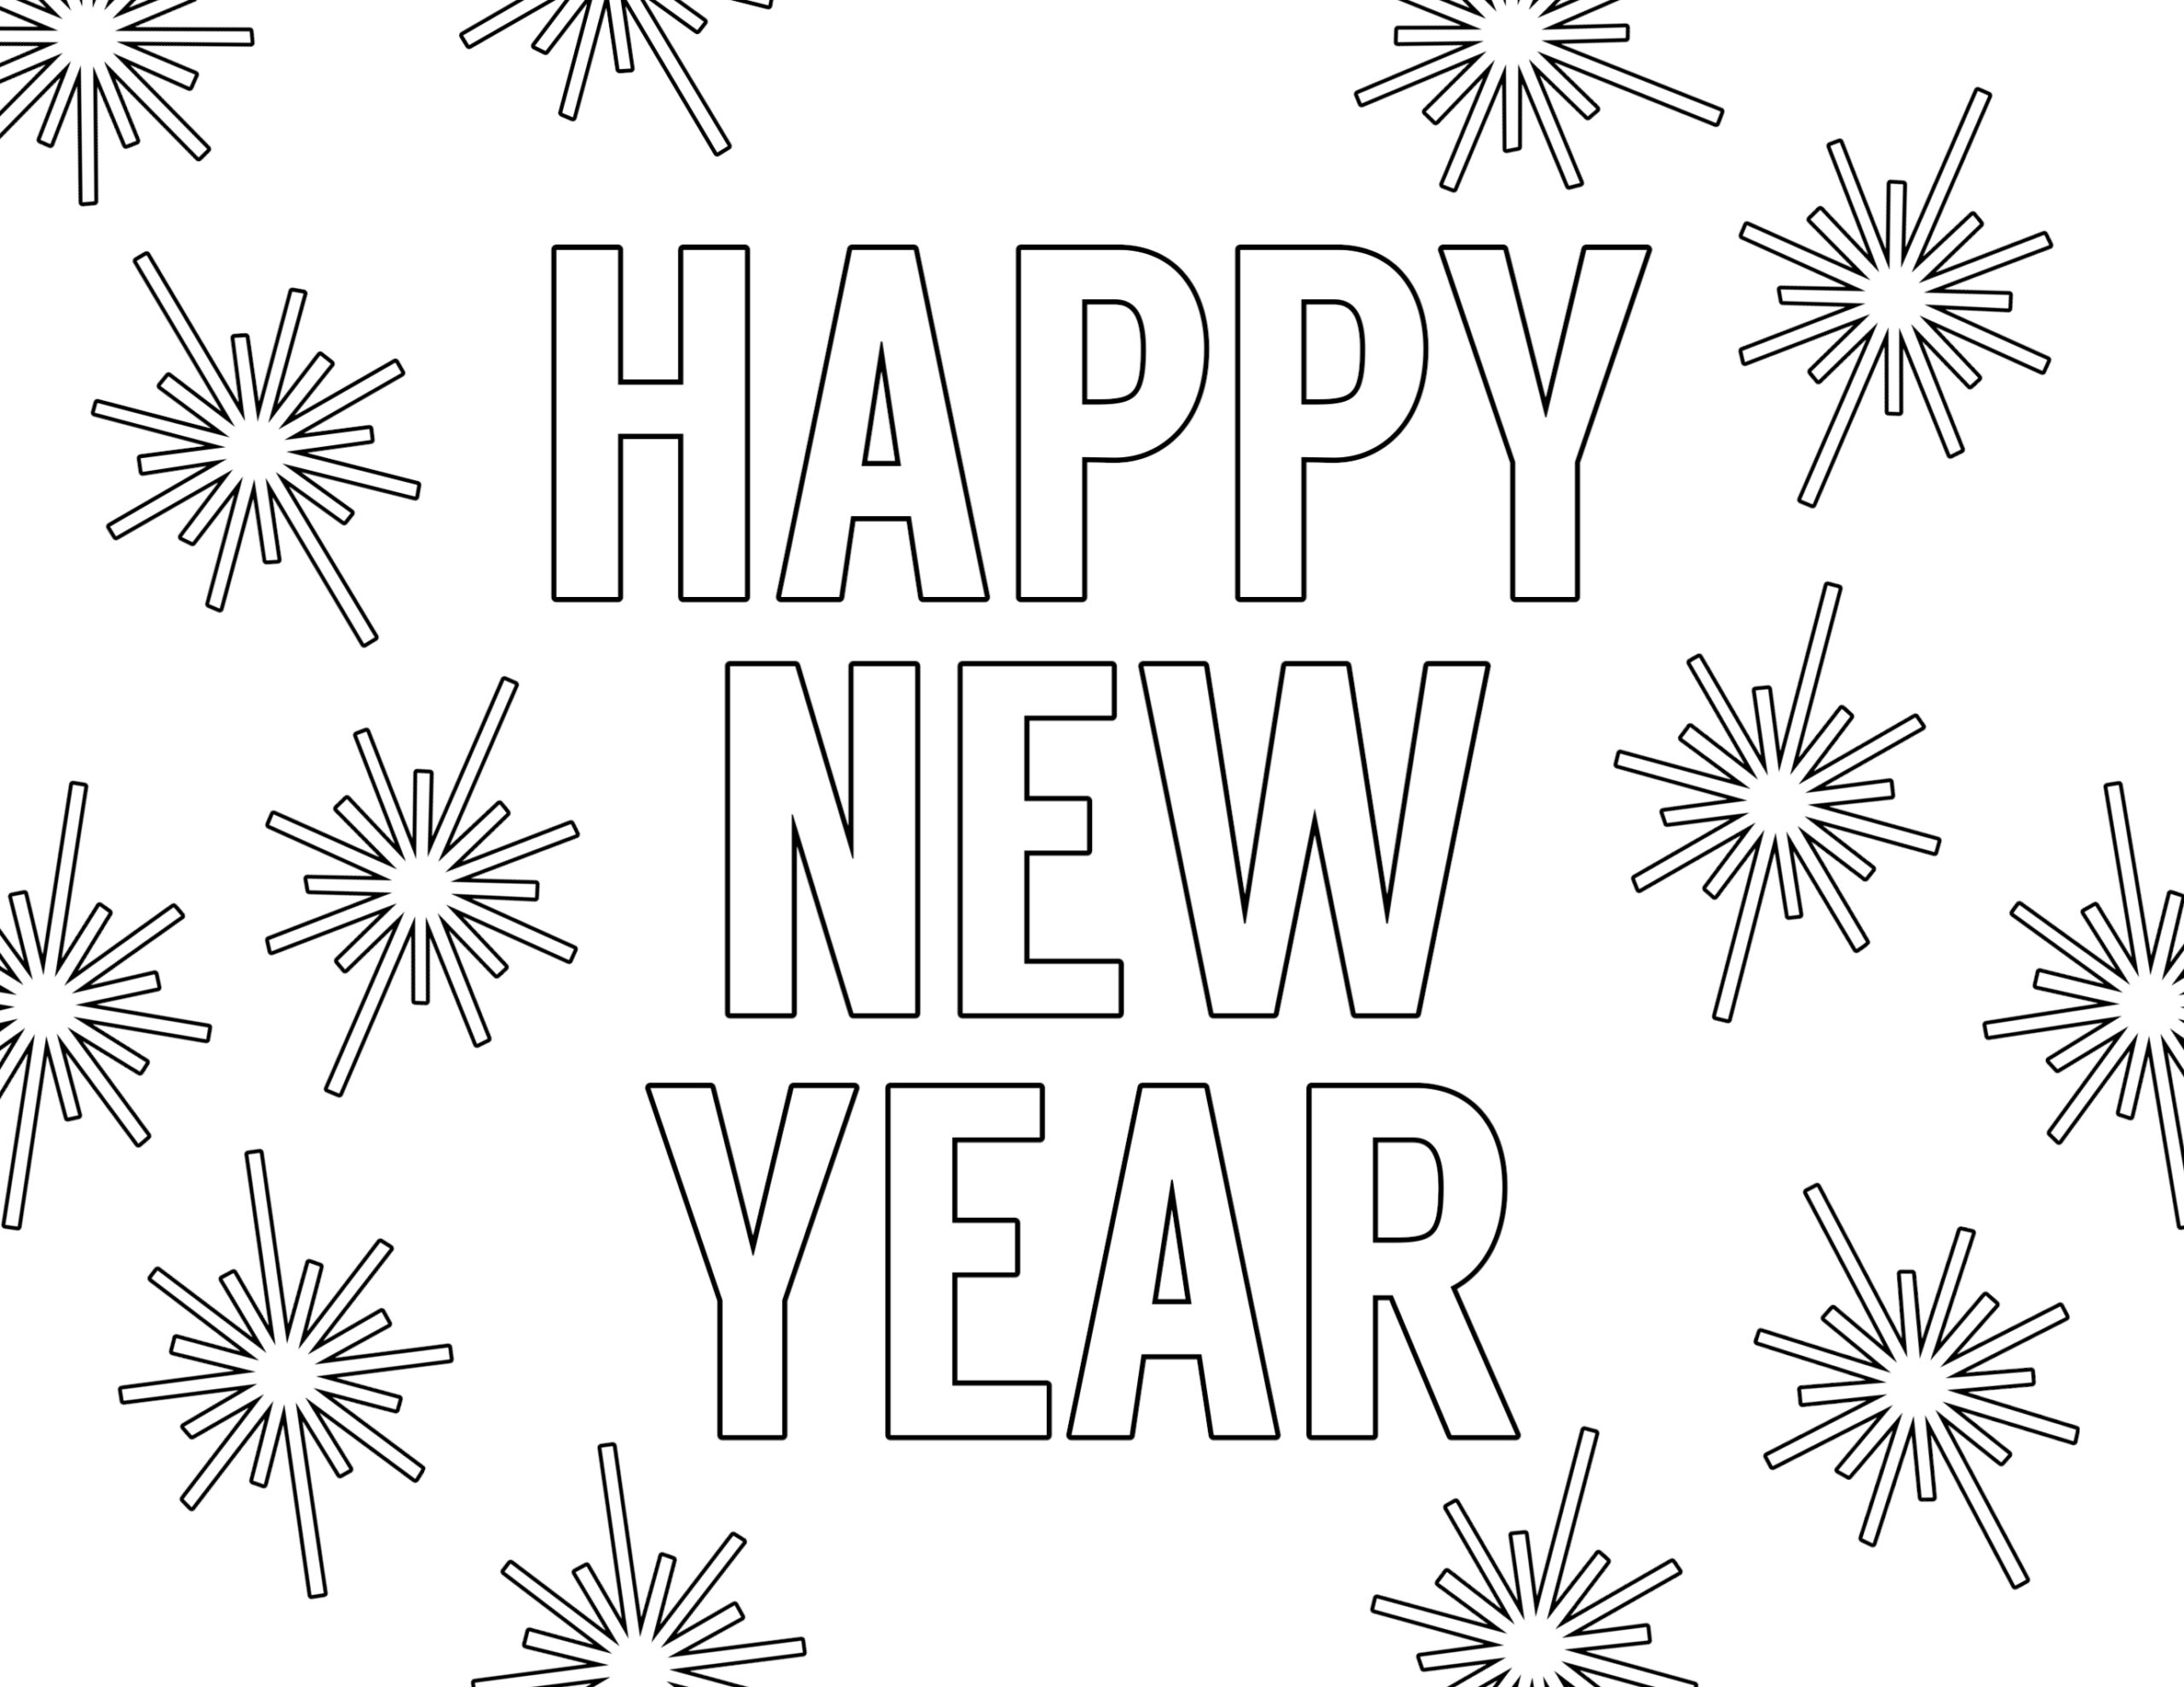 Happy New Year Coloring Pages Free Printable - Paper Trail Design - Free Printable 2018 New Years Coloring Pages